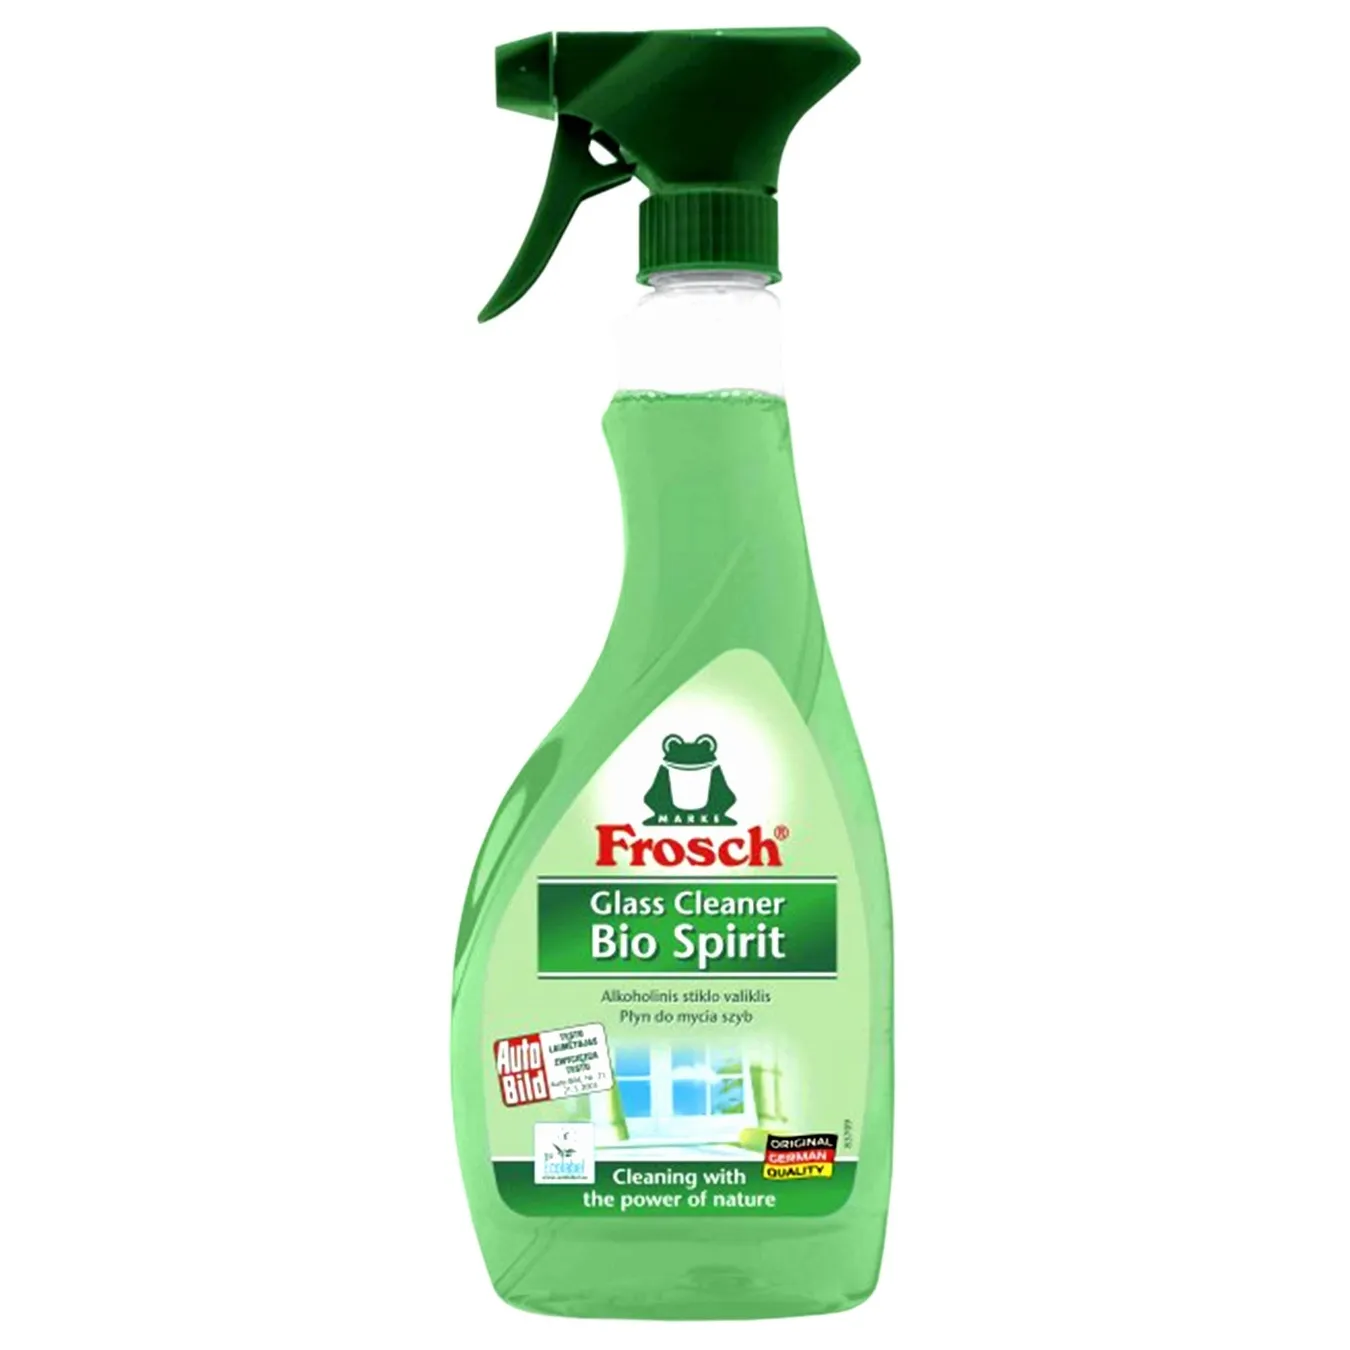 Frosh glass cleaner alcohol 500ml